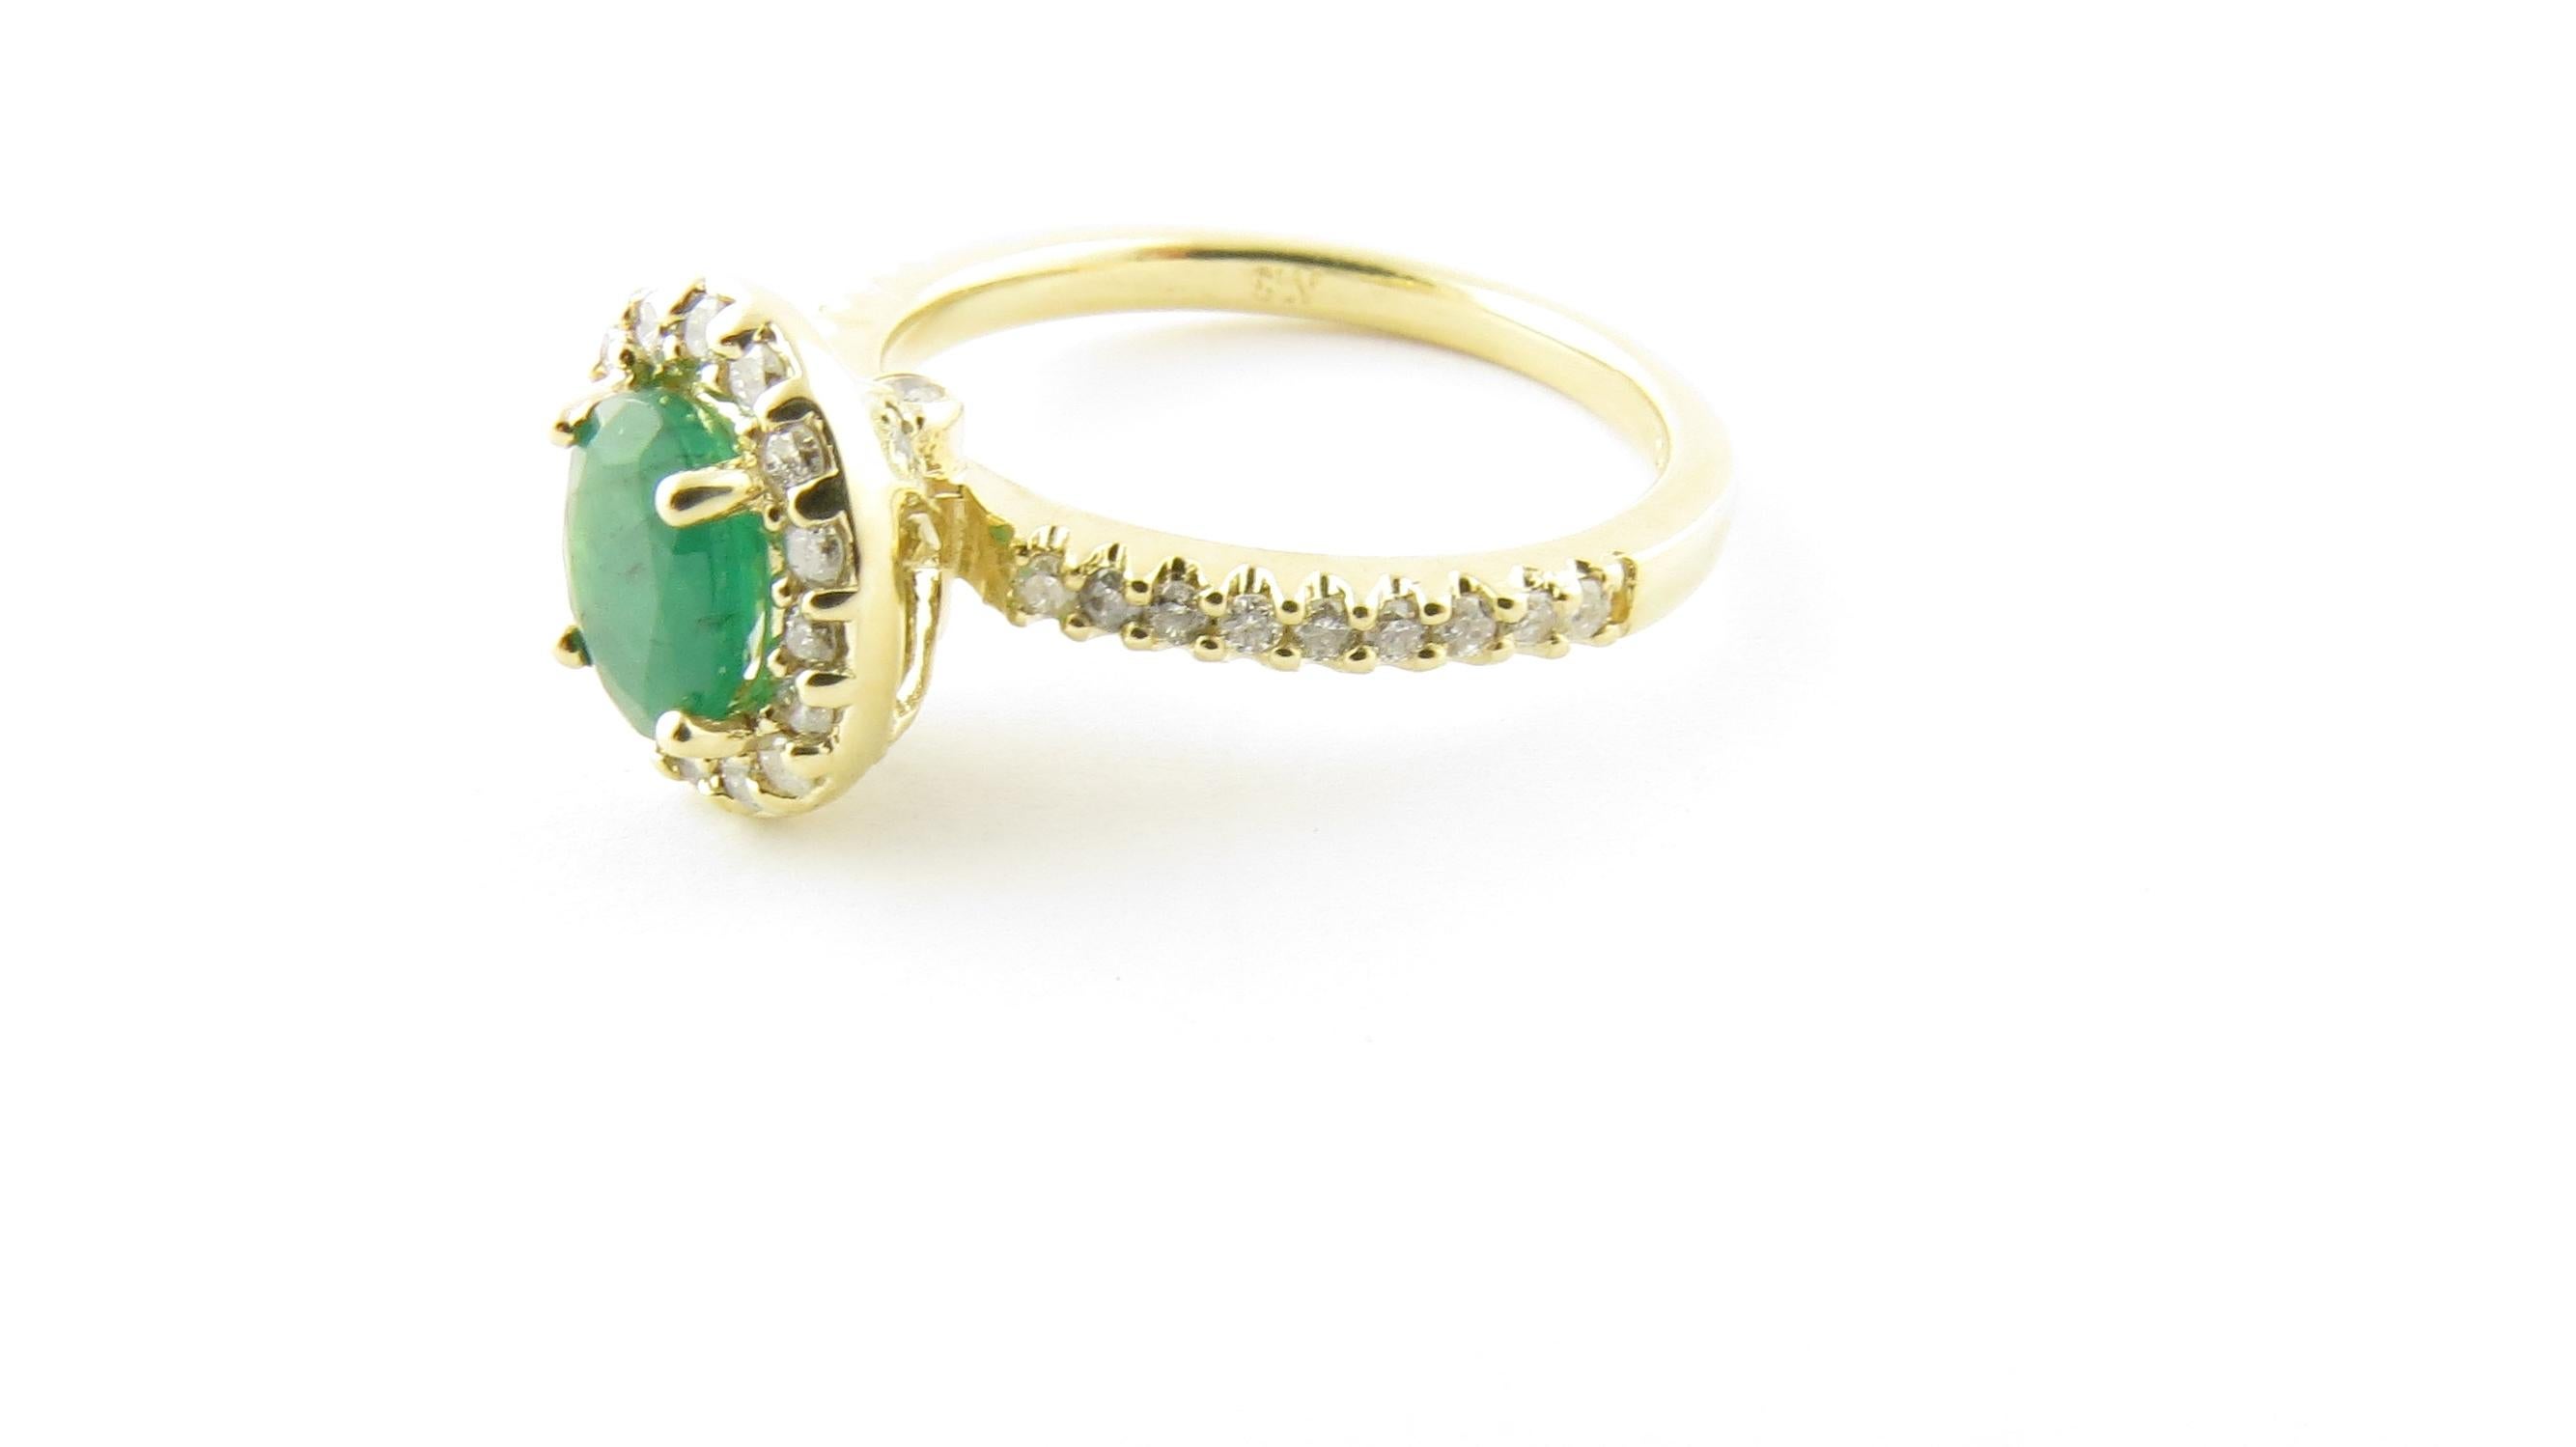 Vintage 14 Karat Yellow Gold Emerald and Diamond Ring 7

This lovely ring features one oval genuine emerald (7 mm x 5 mm) surrounded by 34 round brilliant cut diamonds set in classic 14K yellow gold. Shank measures 2 mm.

Approximate total diamond